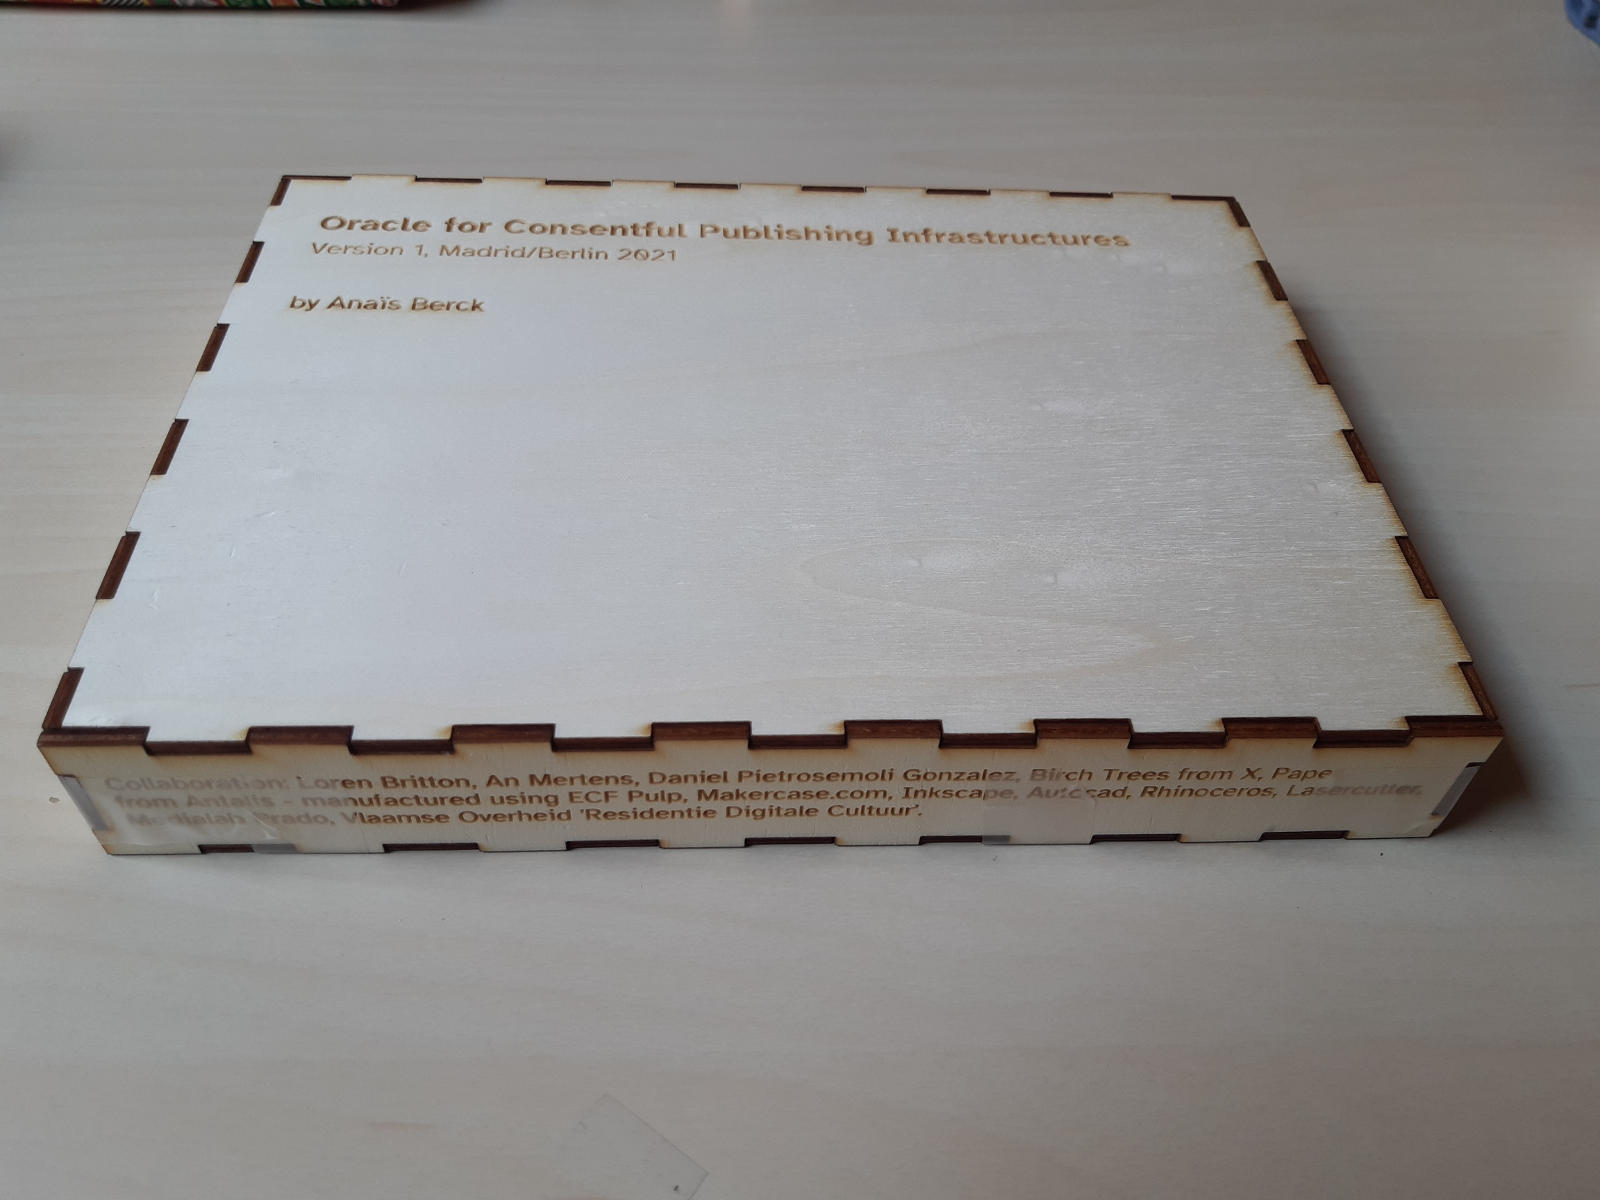 A wooden box is shown. Wood burned onto it are the words ‘Oracle for Consentful Publishing Infrastructures’